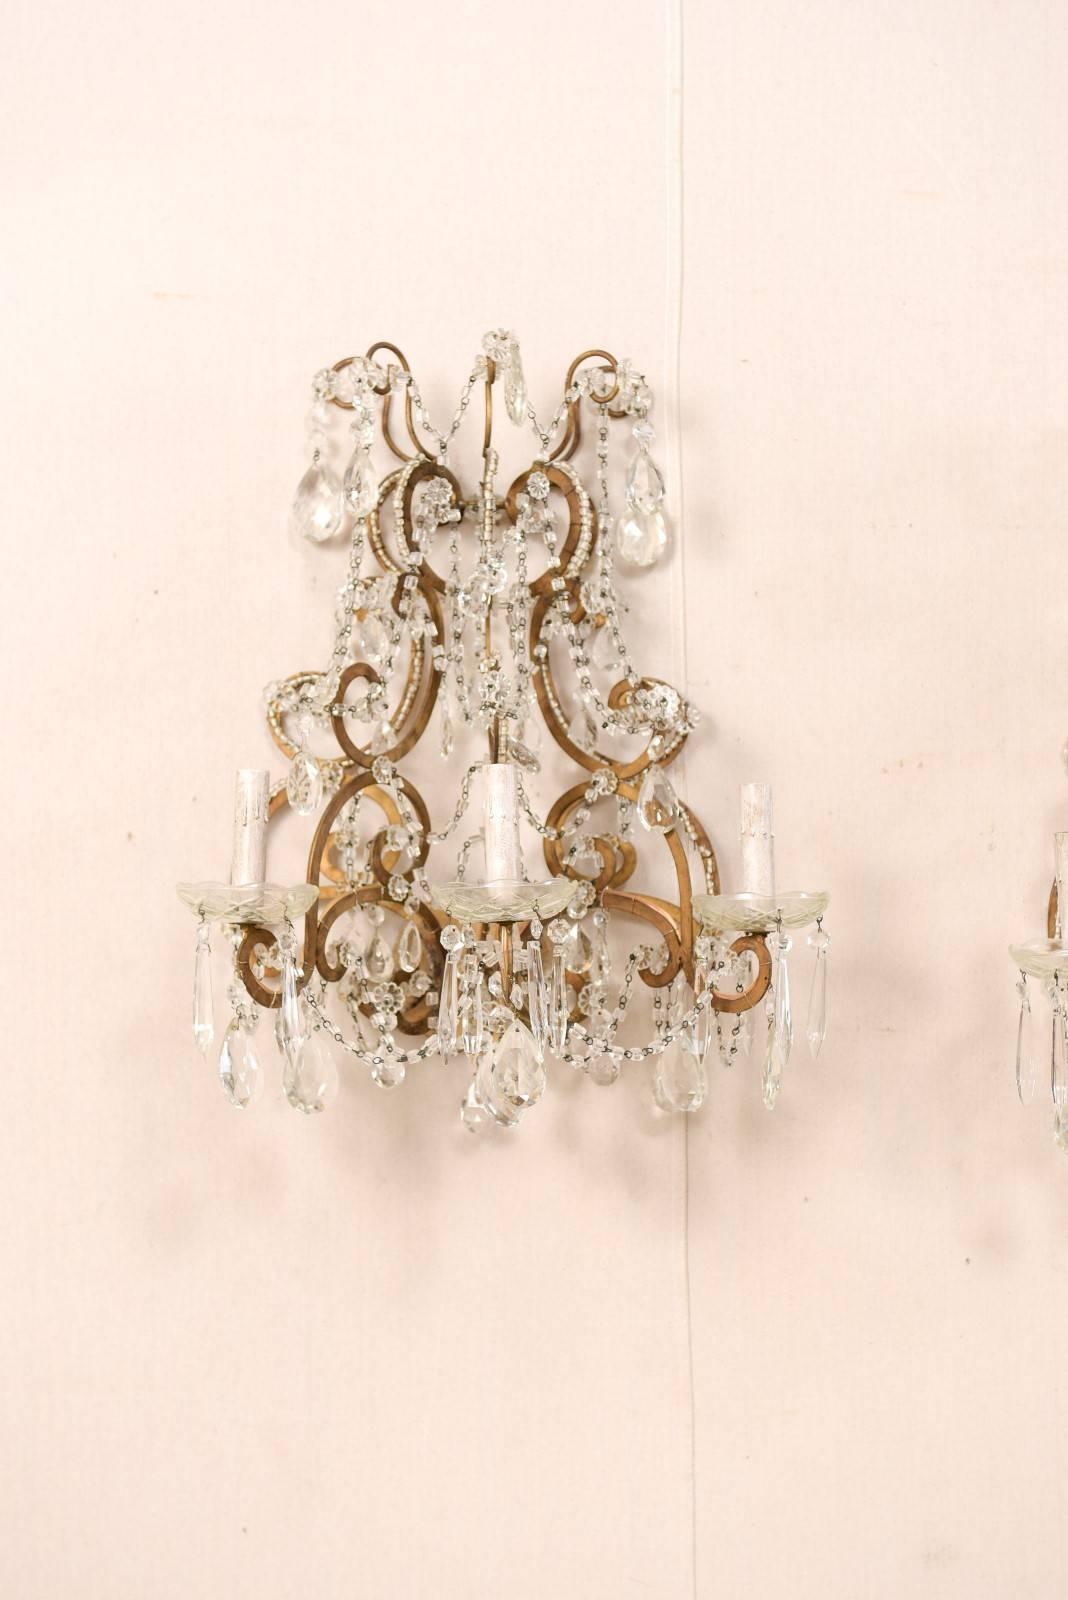 Beaded Pair of Elegant Italian Crystal and Gilded Metal Sconces, Mid-20th Century